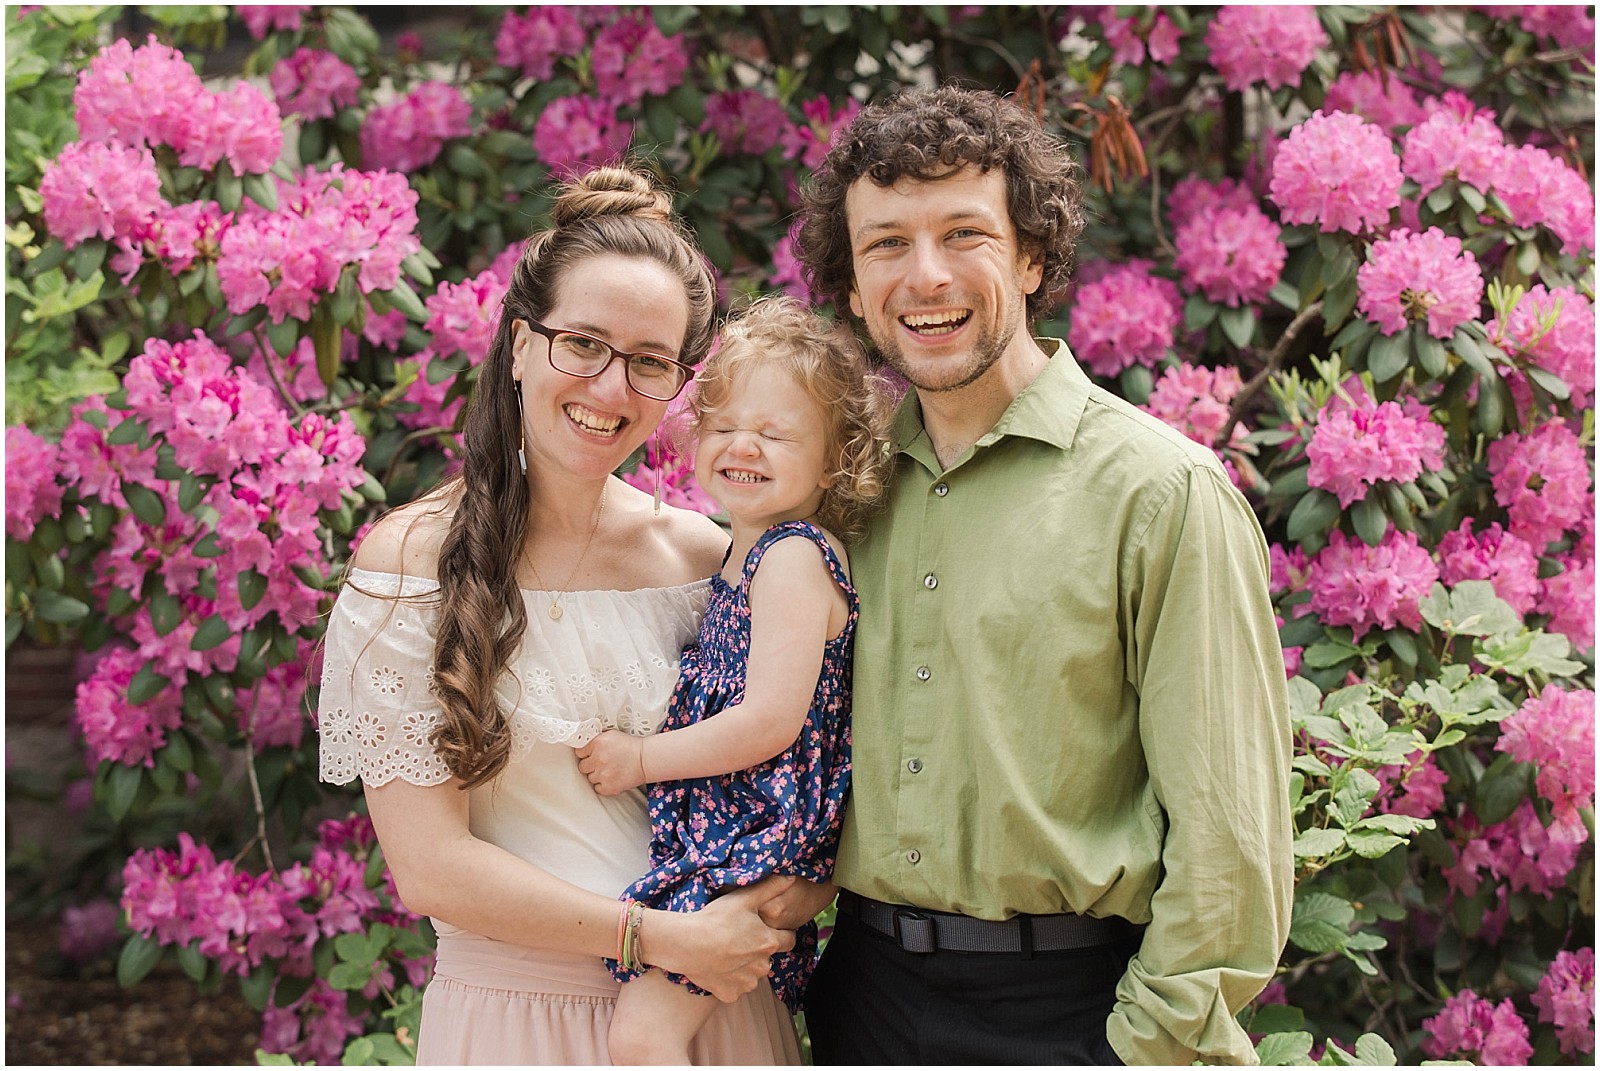 My favorite family photo of us three in front of some rhododendrons.